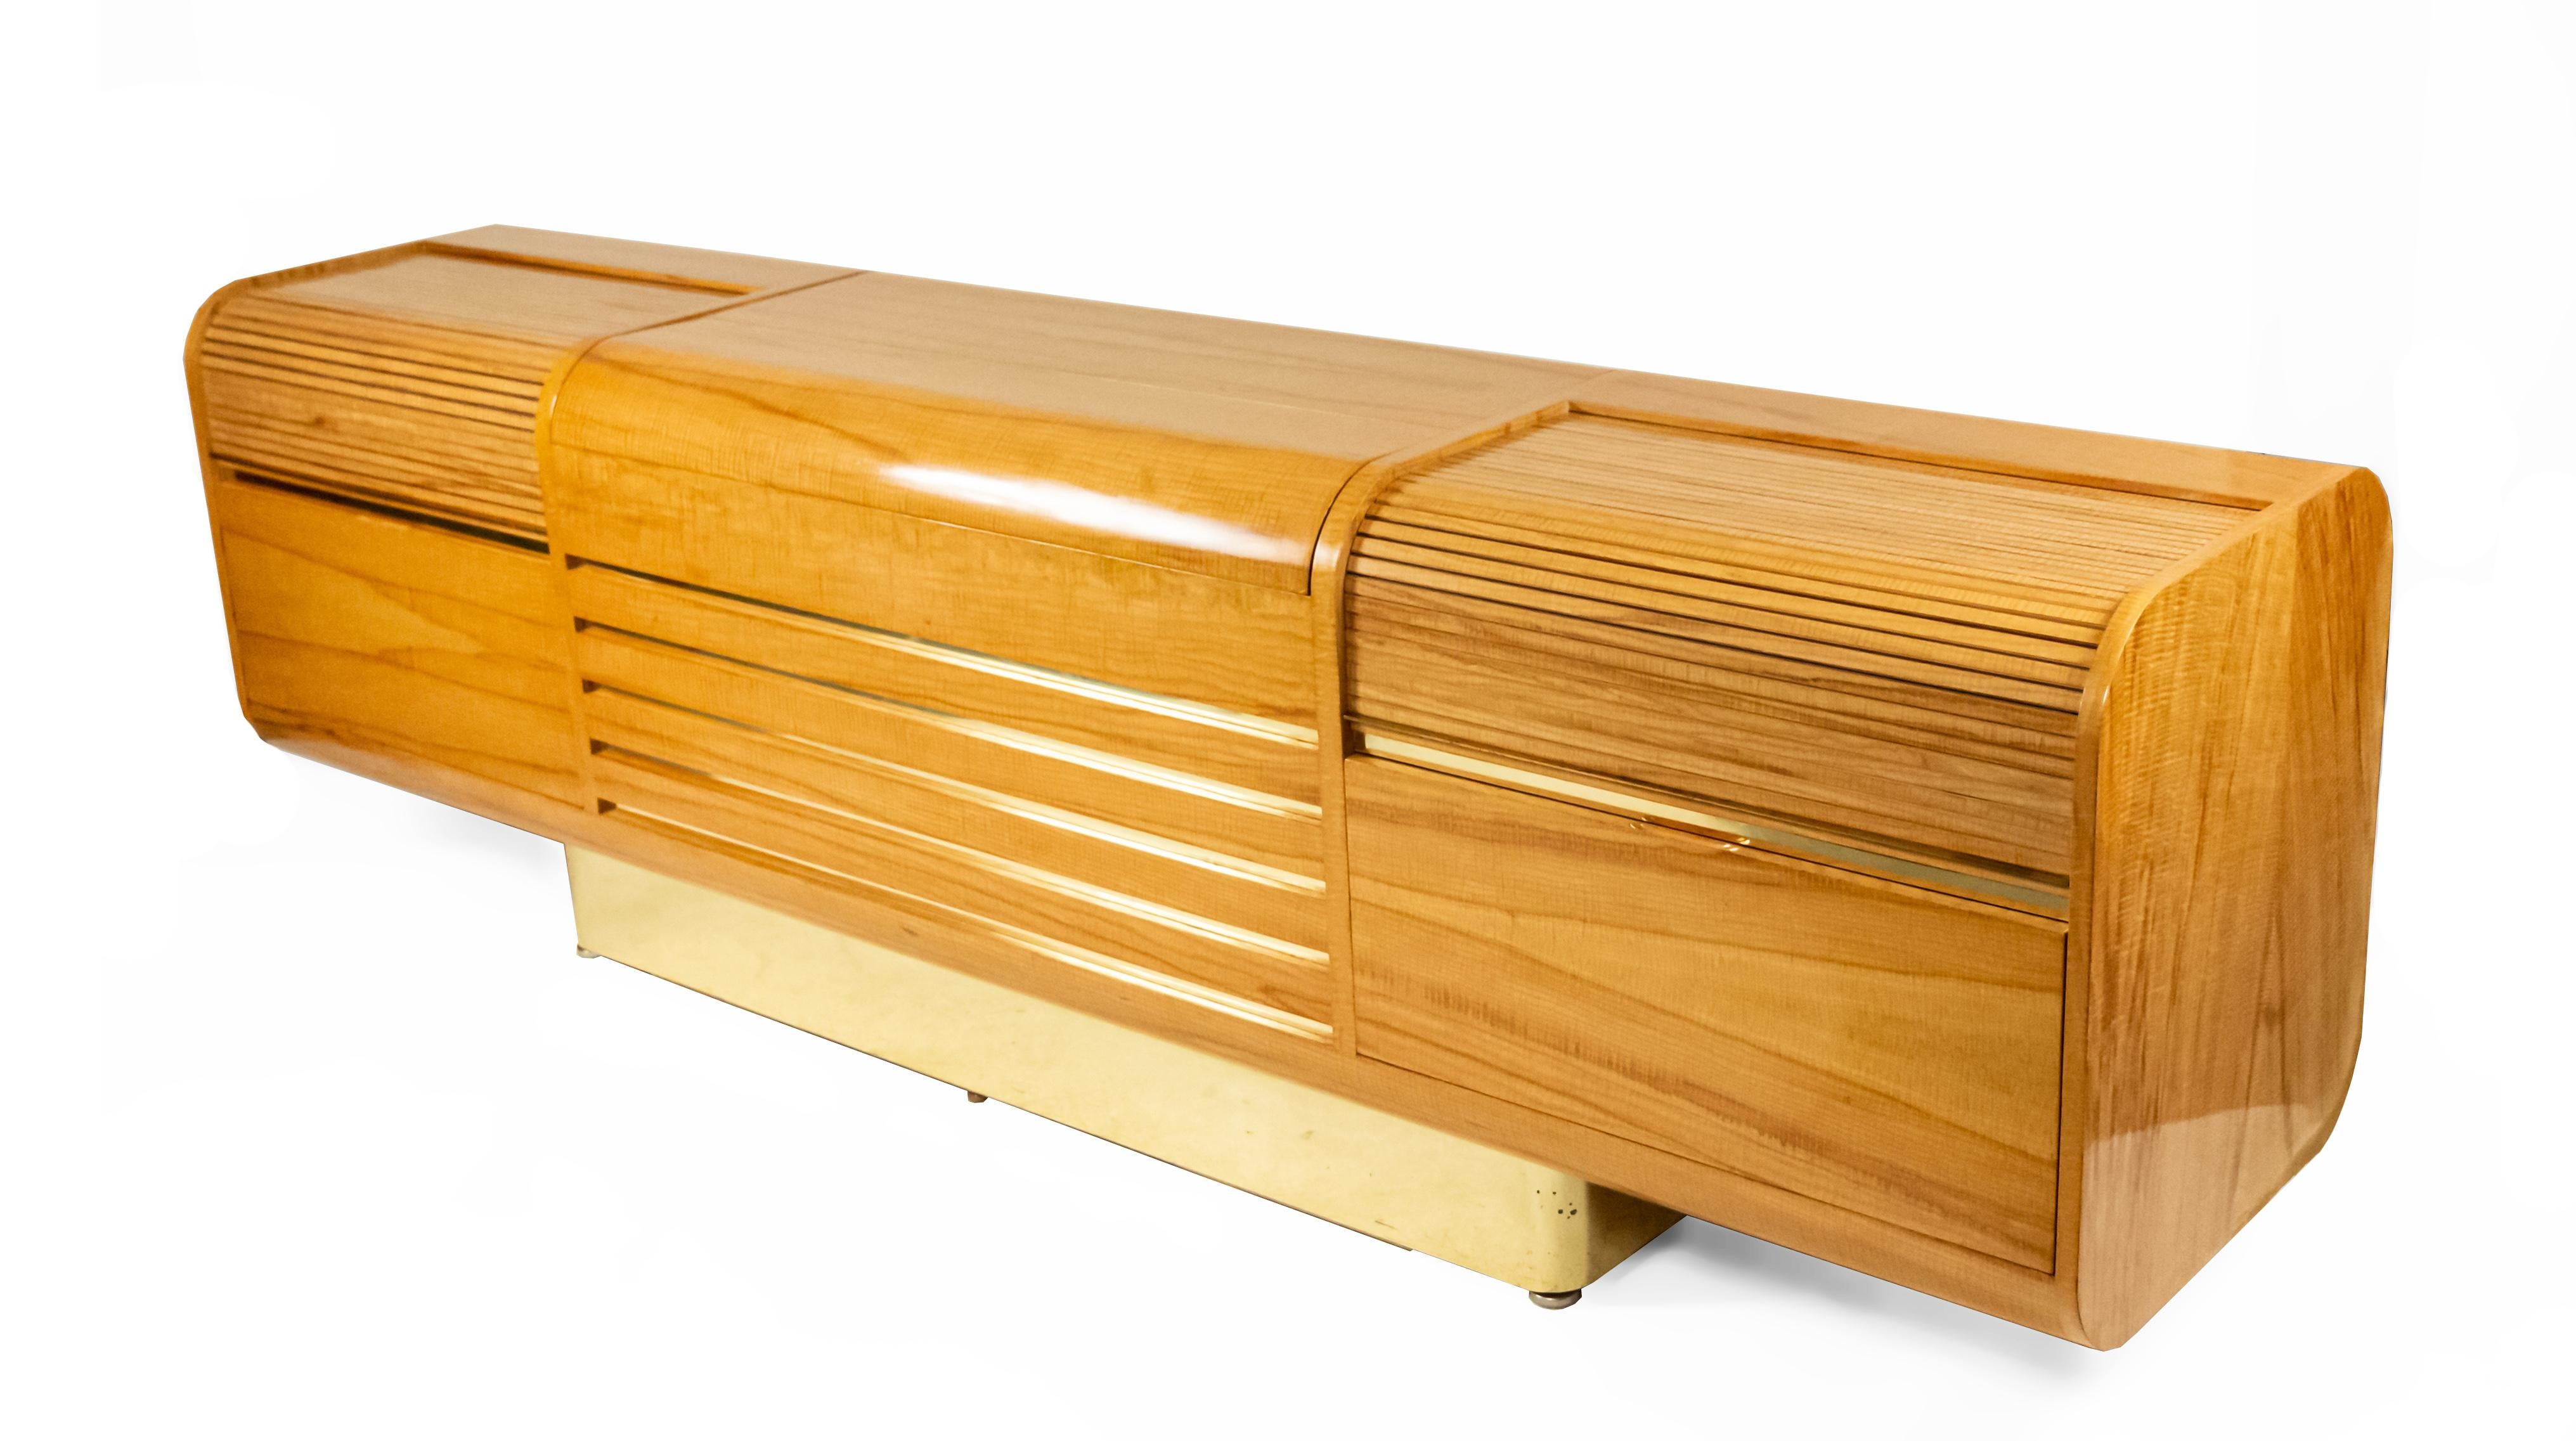 Midcentury tiger maple sideboard / bar with tambour side shelves over two drawers and center with raising mechanism and wine storage. This piece is a custom Vladimir Kagan design for JFK TWA Saarinen Terminal. Label on interior reads: 